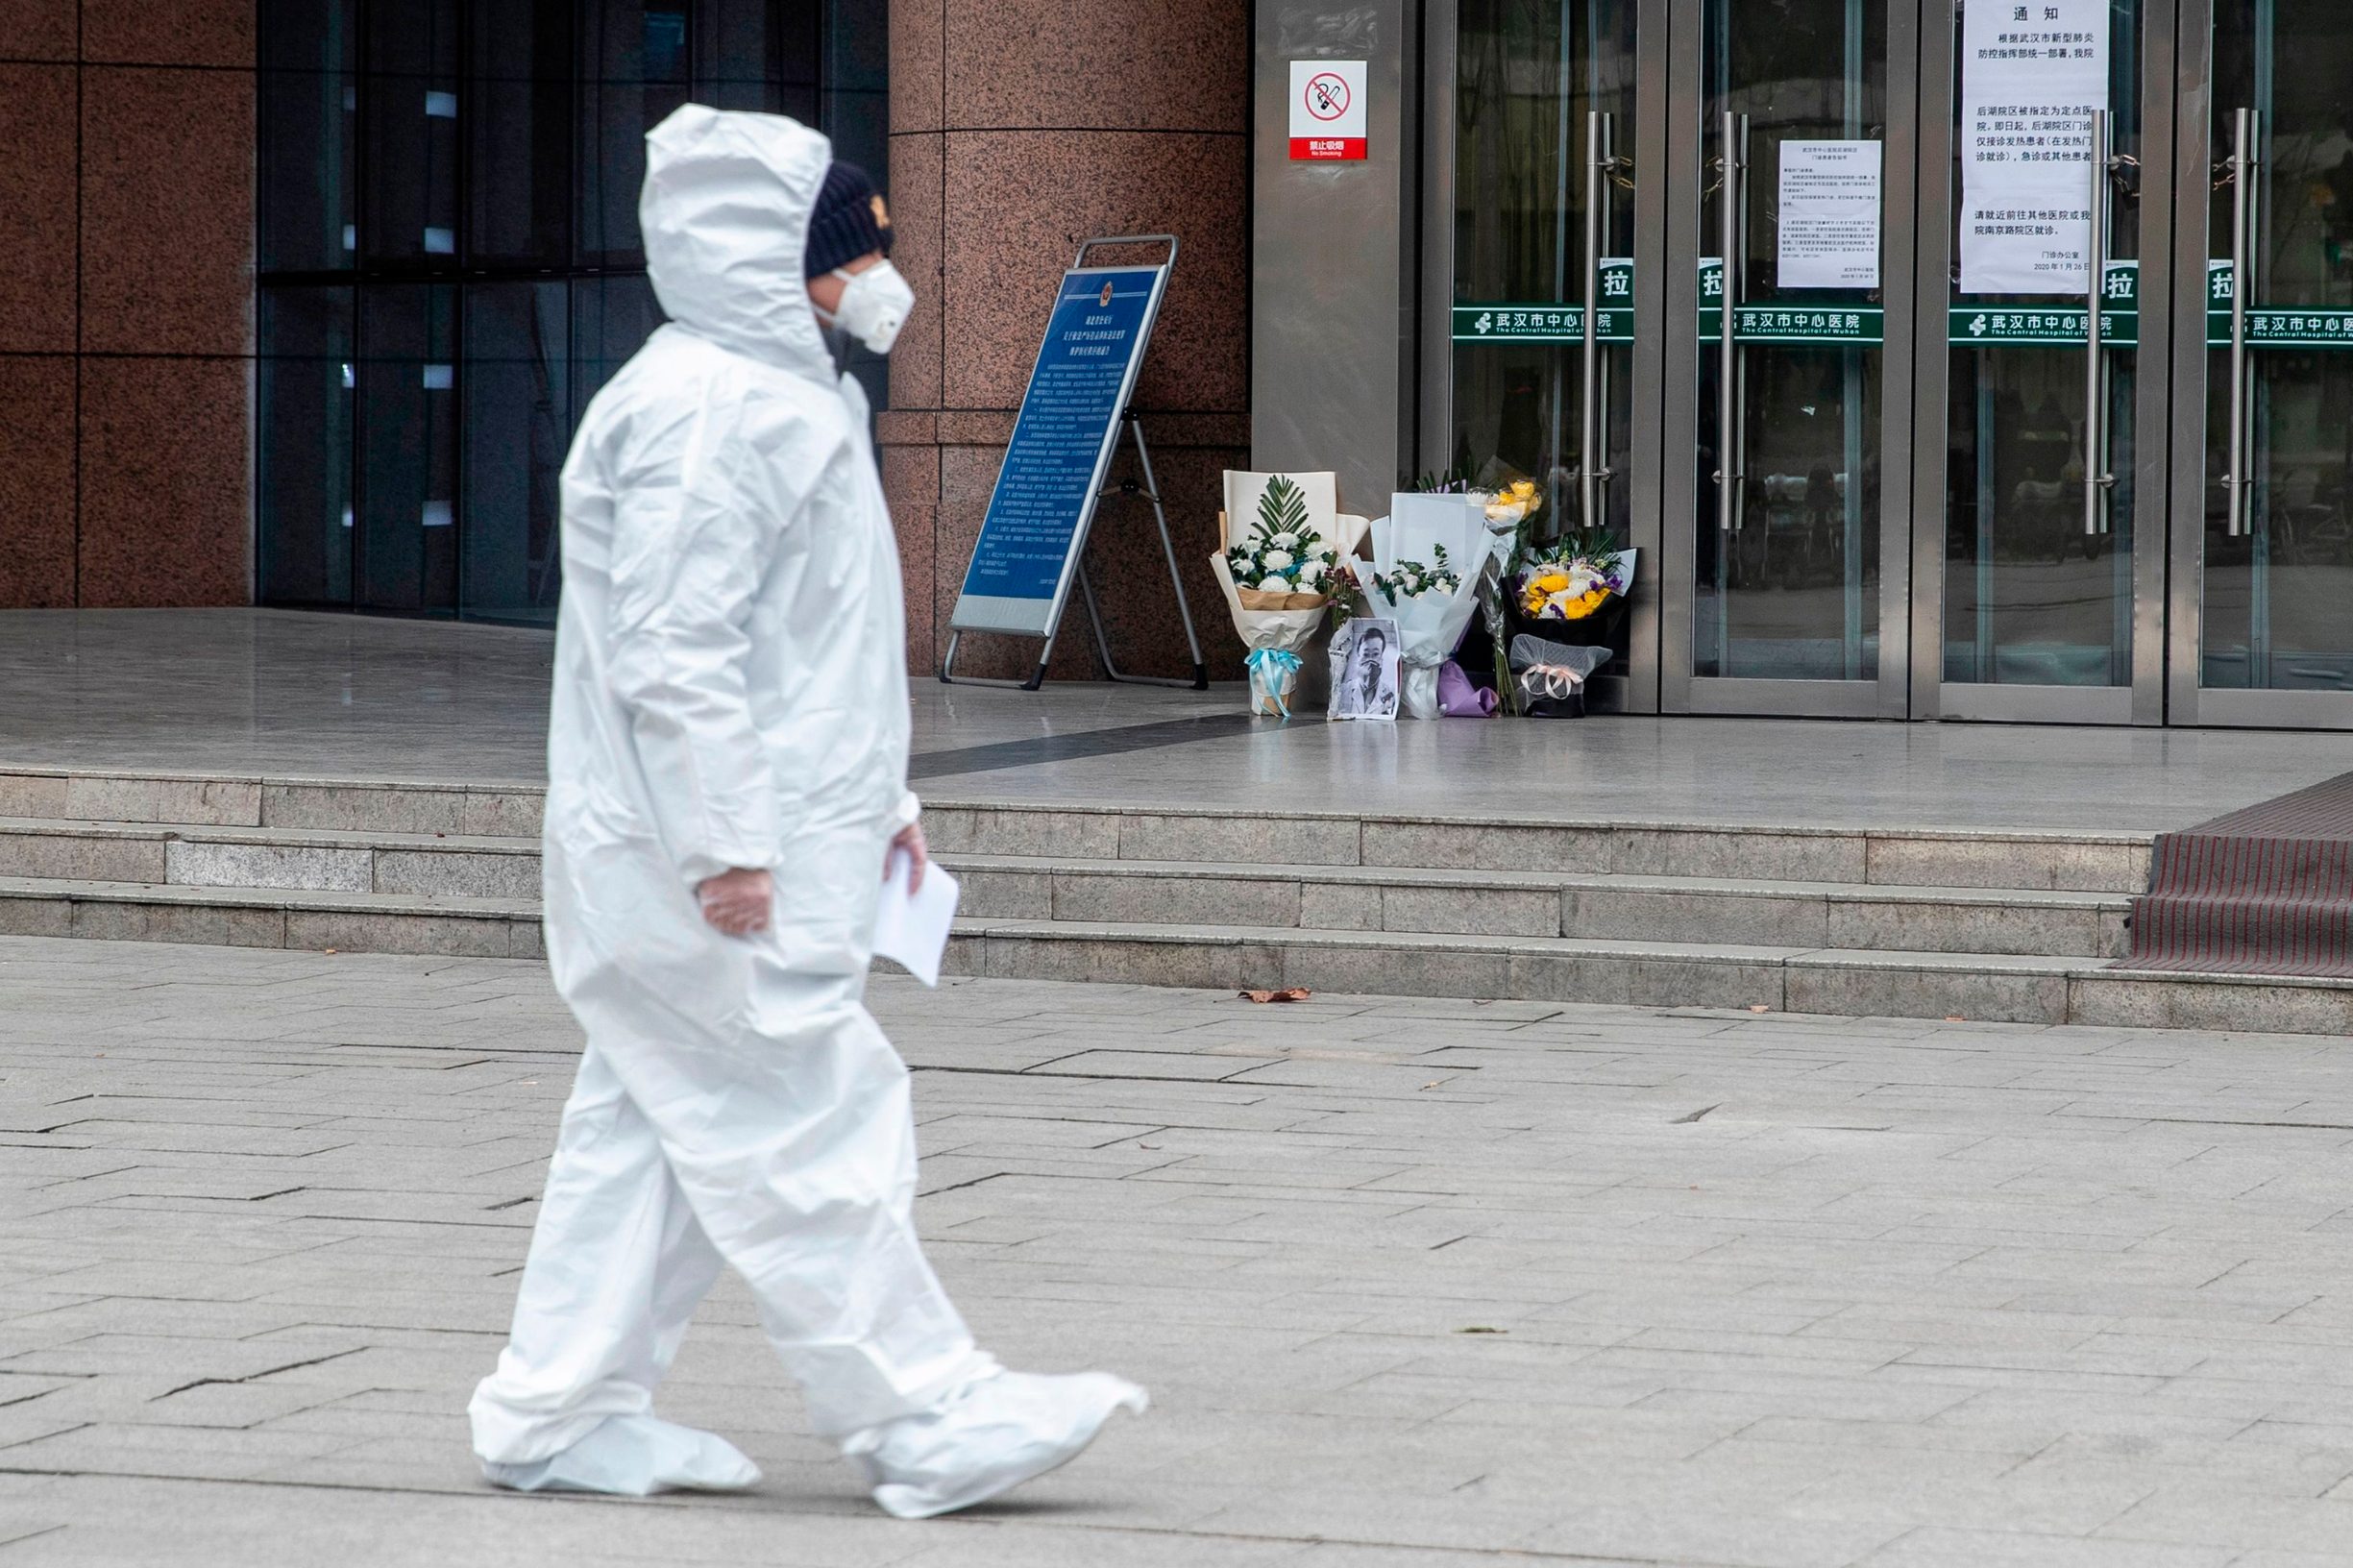 A medical staff member walks past a flower tribute to the late ophthalmologist Li Wenliang at the Houhu Branch of Wuhan Central Hospital in Wuhan in China's central Hubei province on February 7, 2020. - A Chinese doctor who was punished after raising the alarm about China's new coronavirus died from the pathogen on February 7, sparking an outpouring of grief and anger over a worsening crisis that has now killed more than 630 people. (Photo by STR / AFP) / China OUT